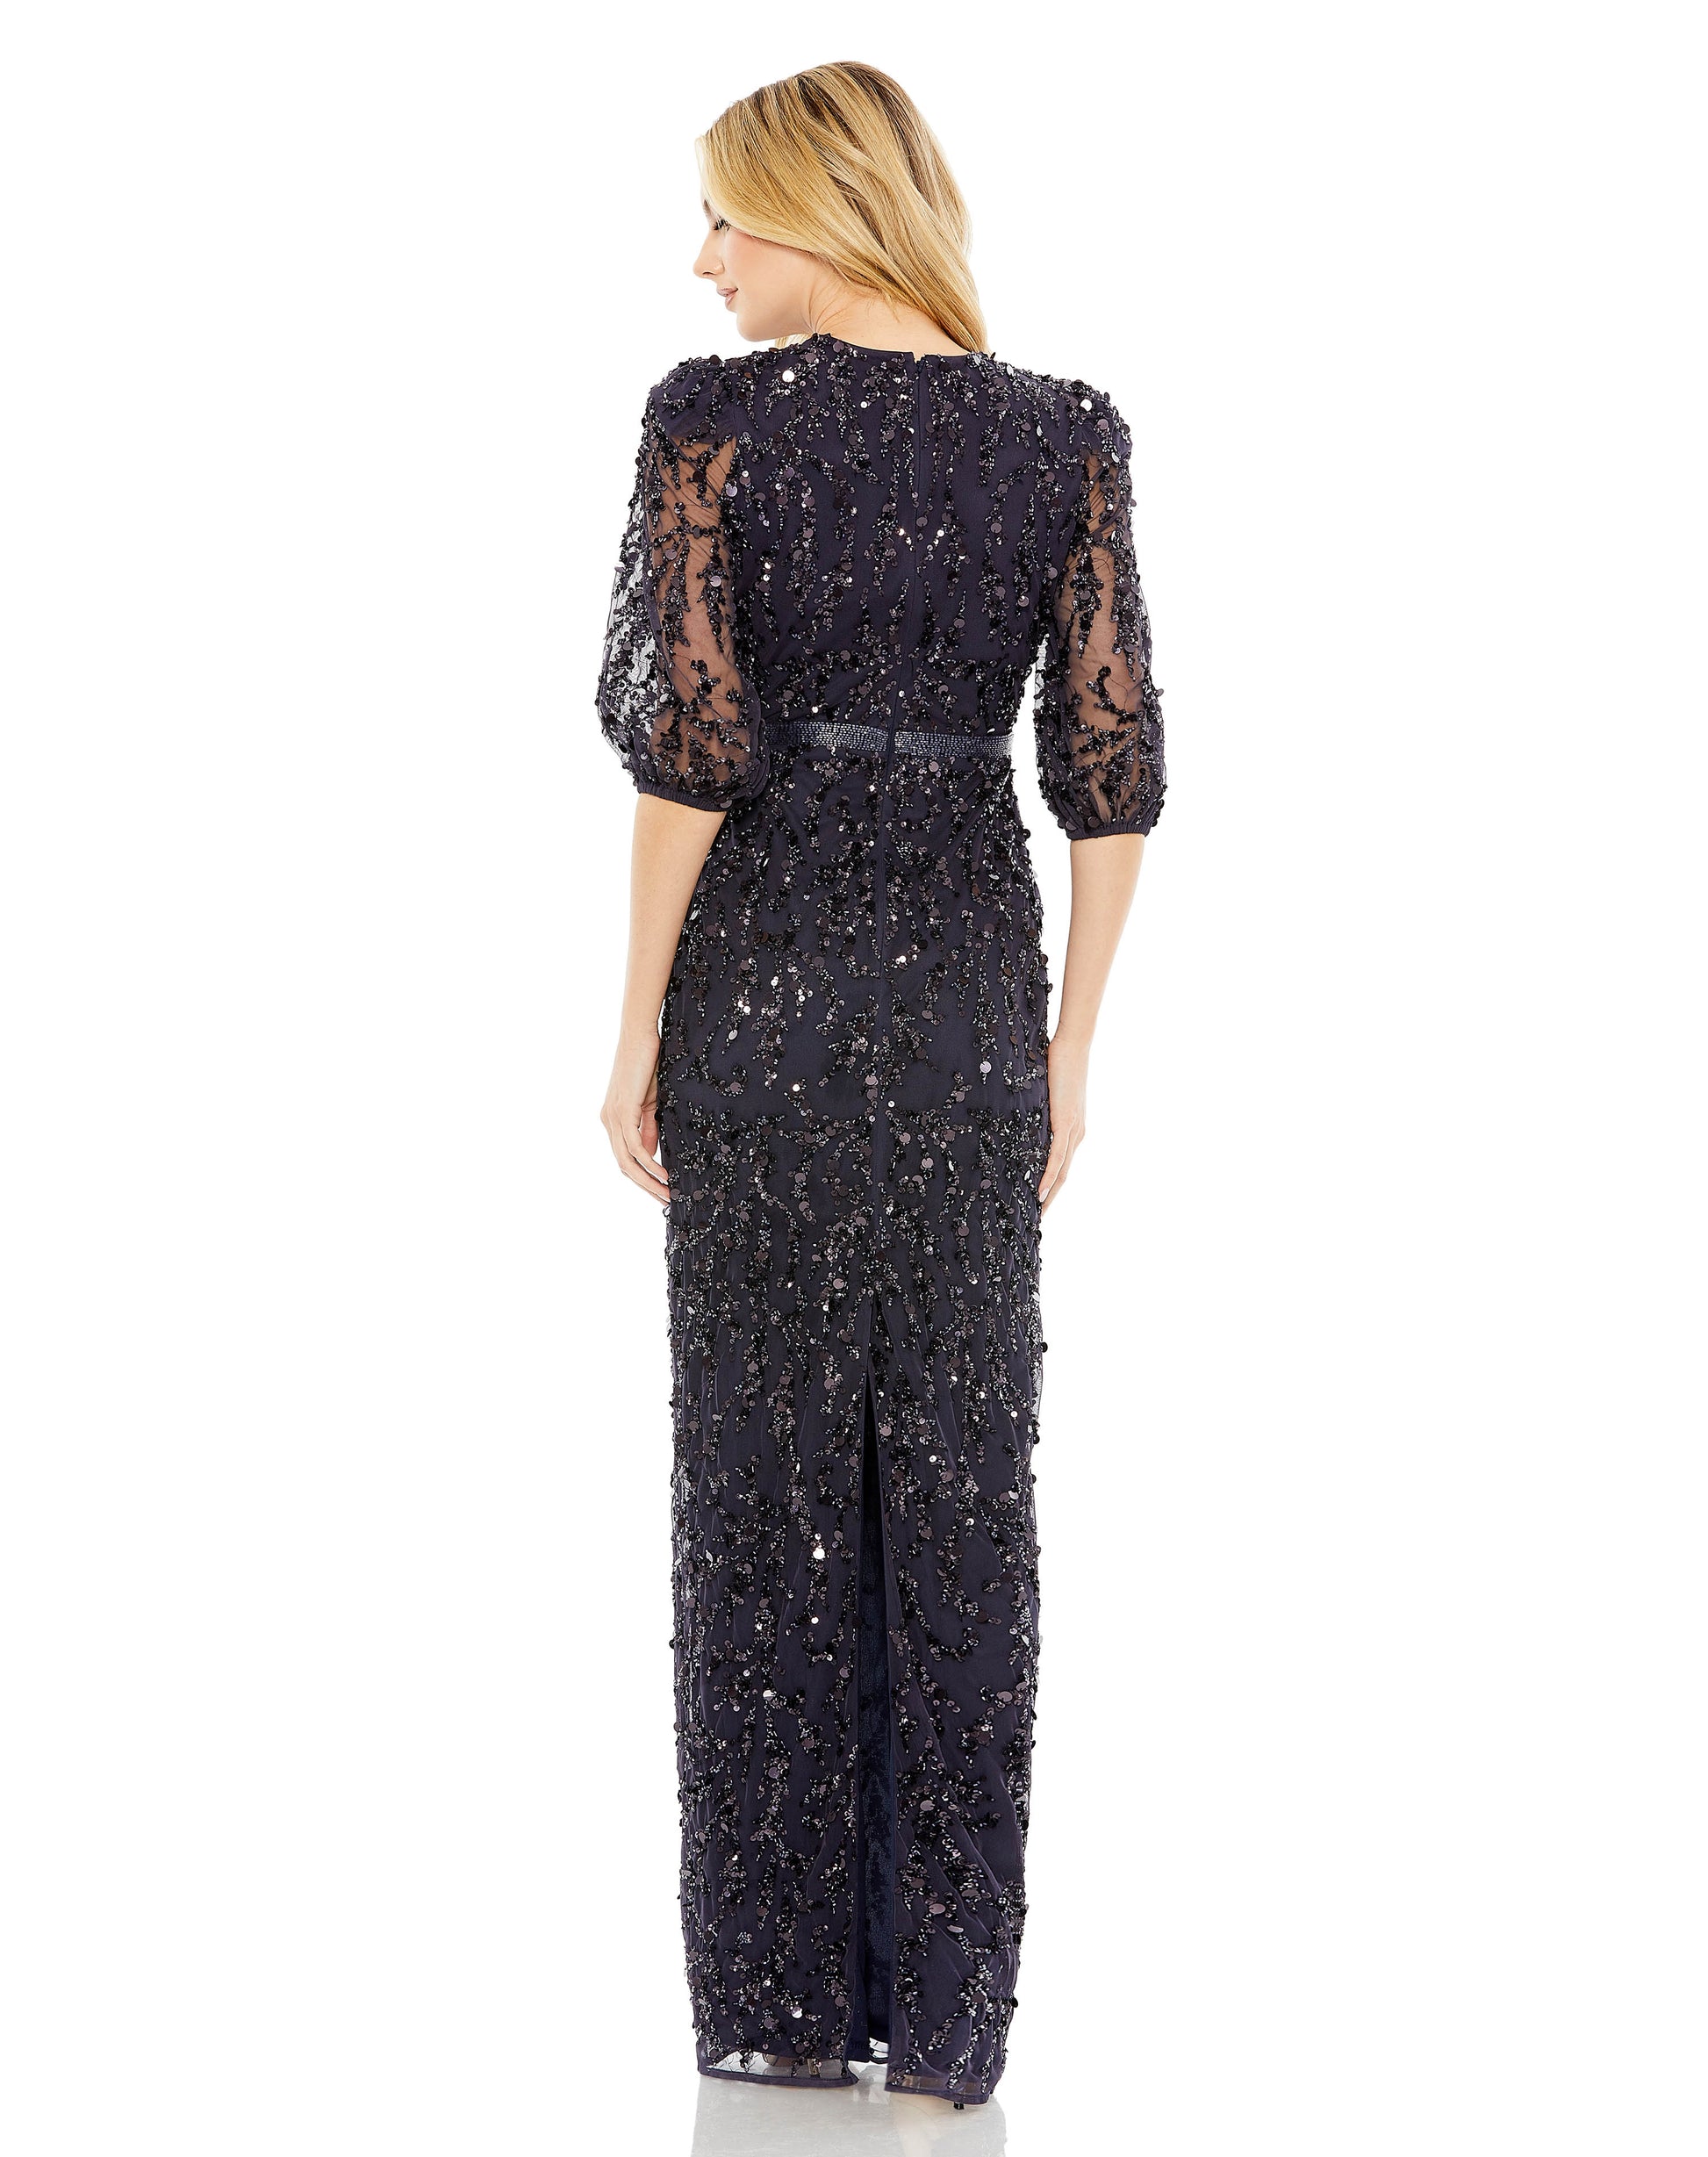 Mac Duggal Sequin fabric (100% polyester) Fully lined through bodice and skirt; sheer unlined sleeves High neckline Puff elbow sleeves Beaded waist detail Concealed back zipper Approx. 62.5" from top of shoulder to bottom hem Available in Midnight (dark b